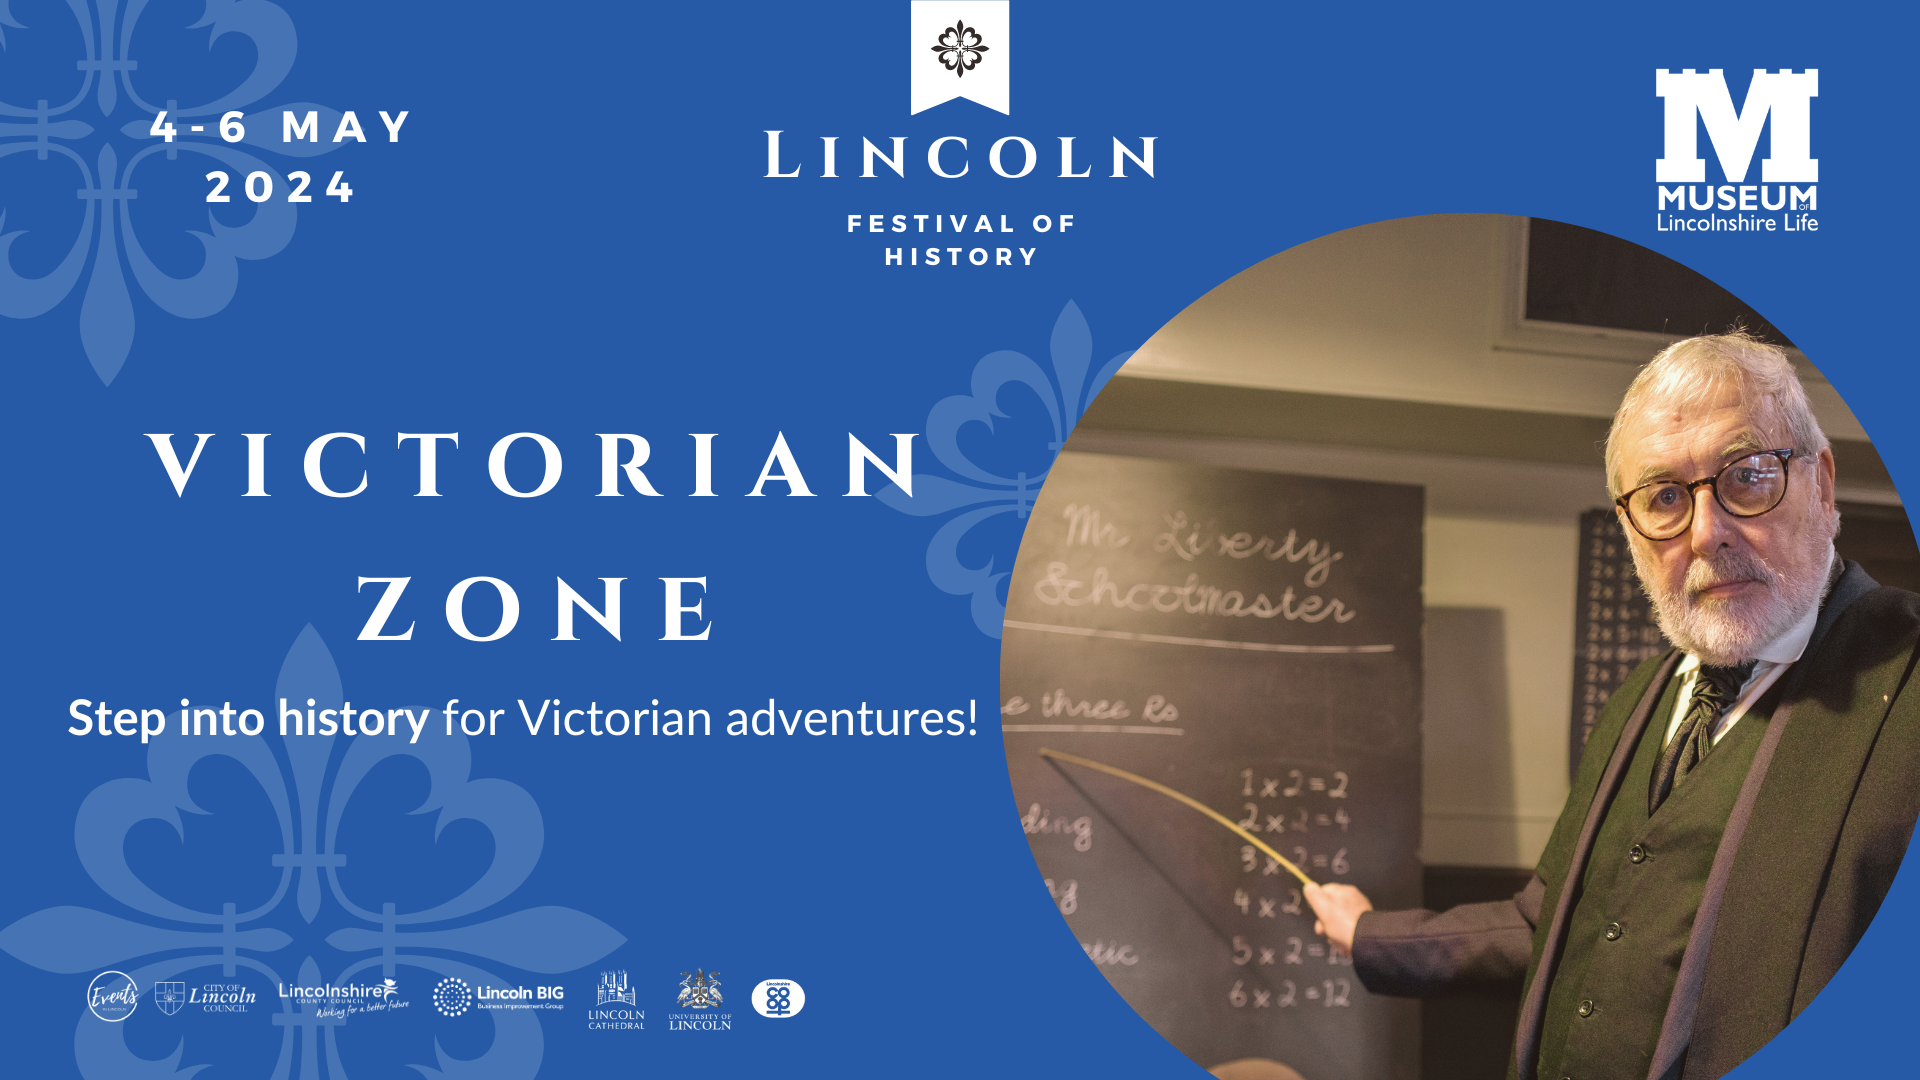 Lincoln Festival of History, 2-4 May 2024, Victorian Zone at Museum of Lincolnshire Life